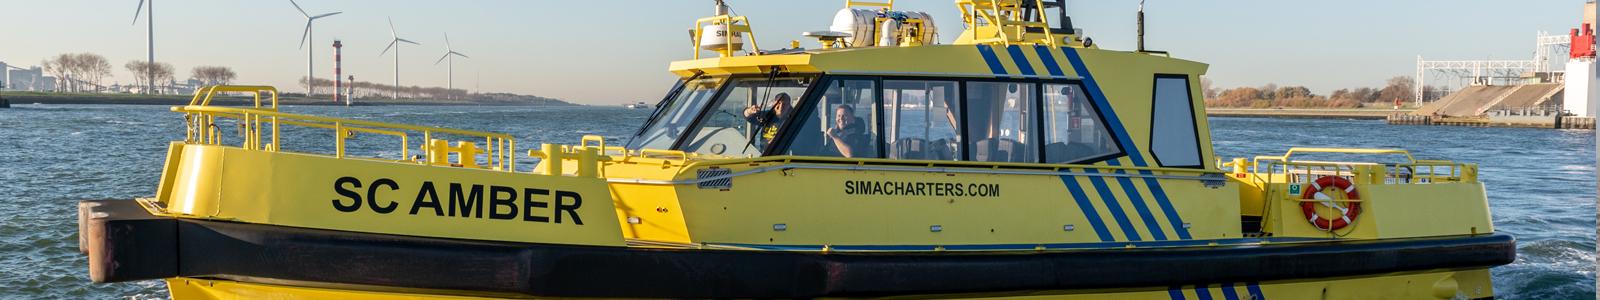 windfarm support  - Sima Charters - SC Amber